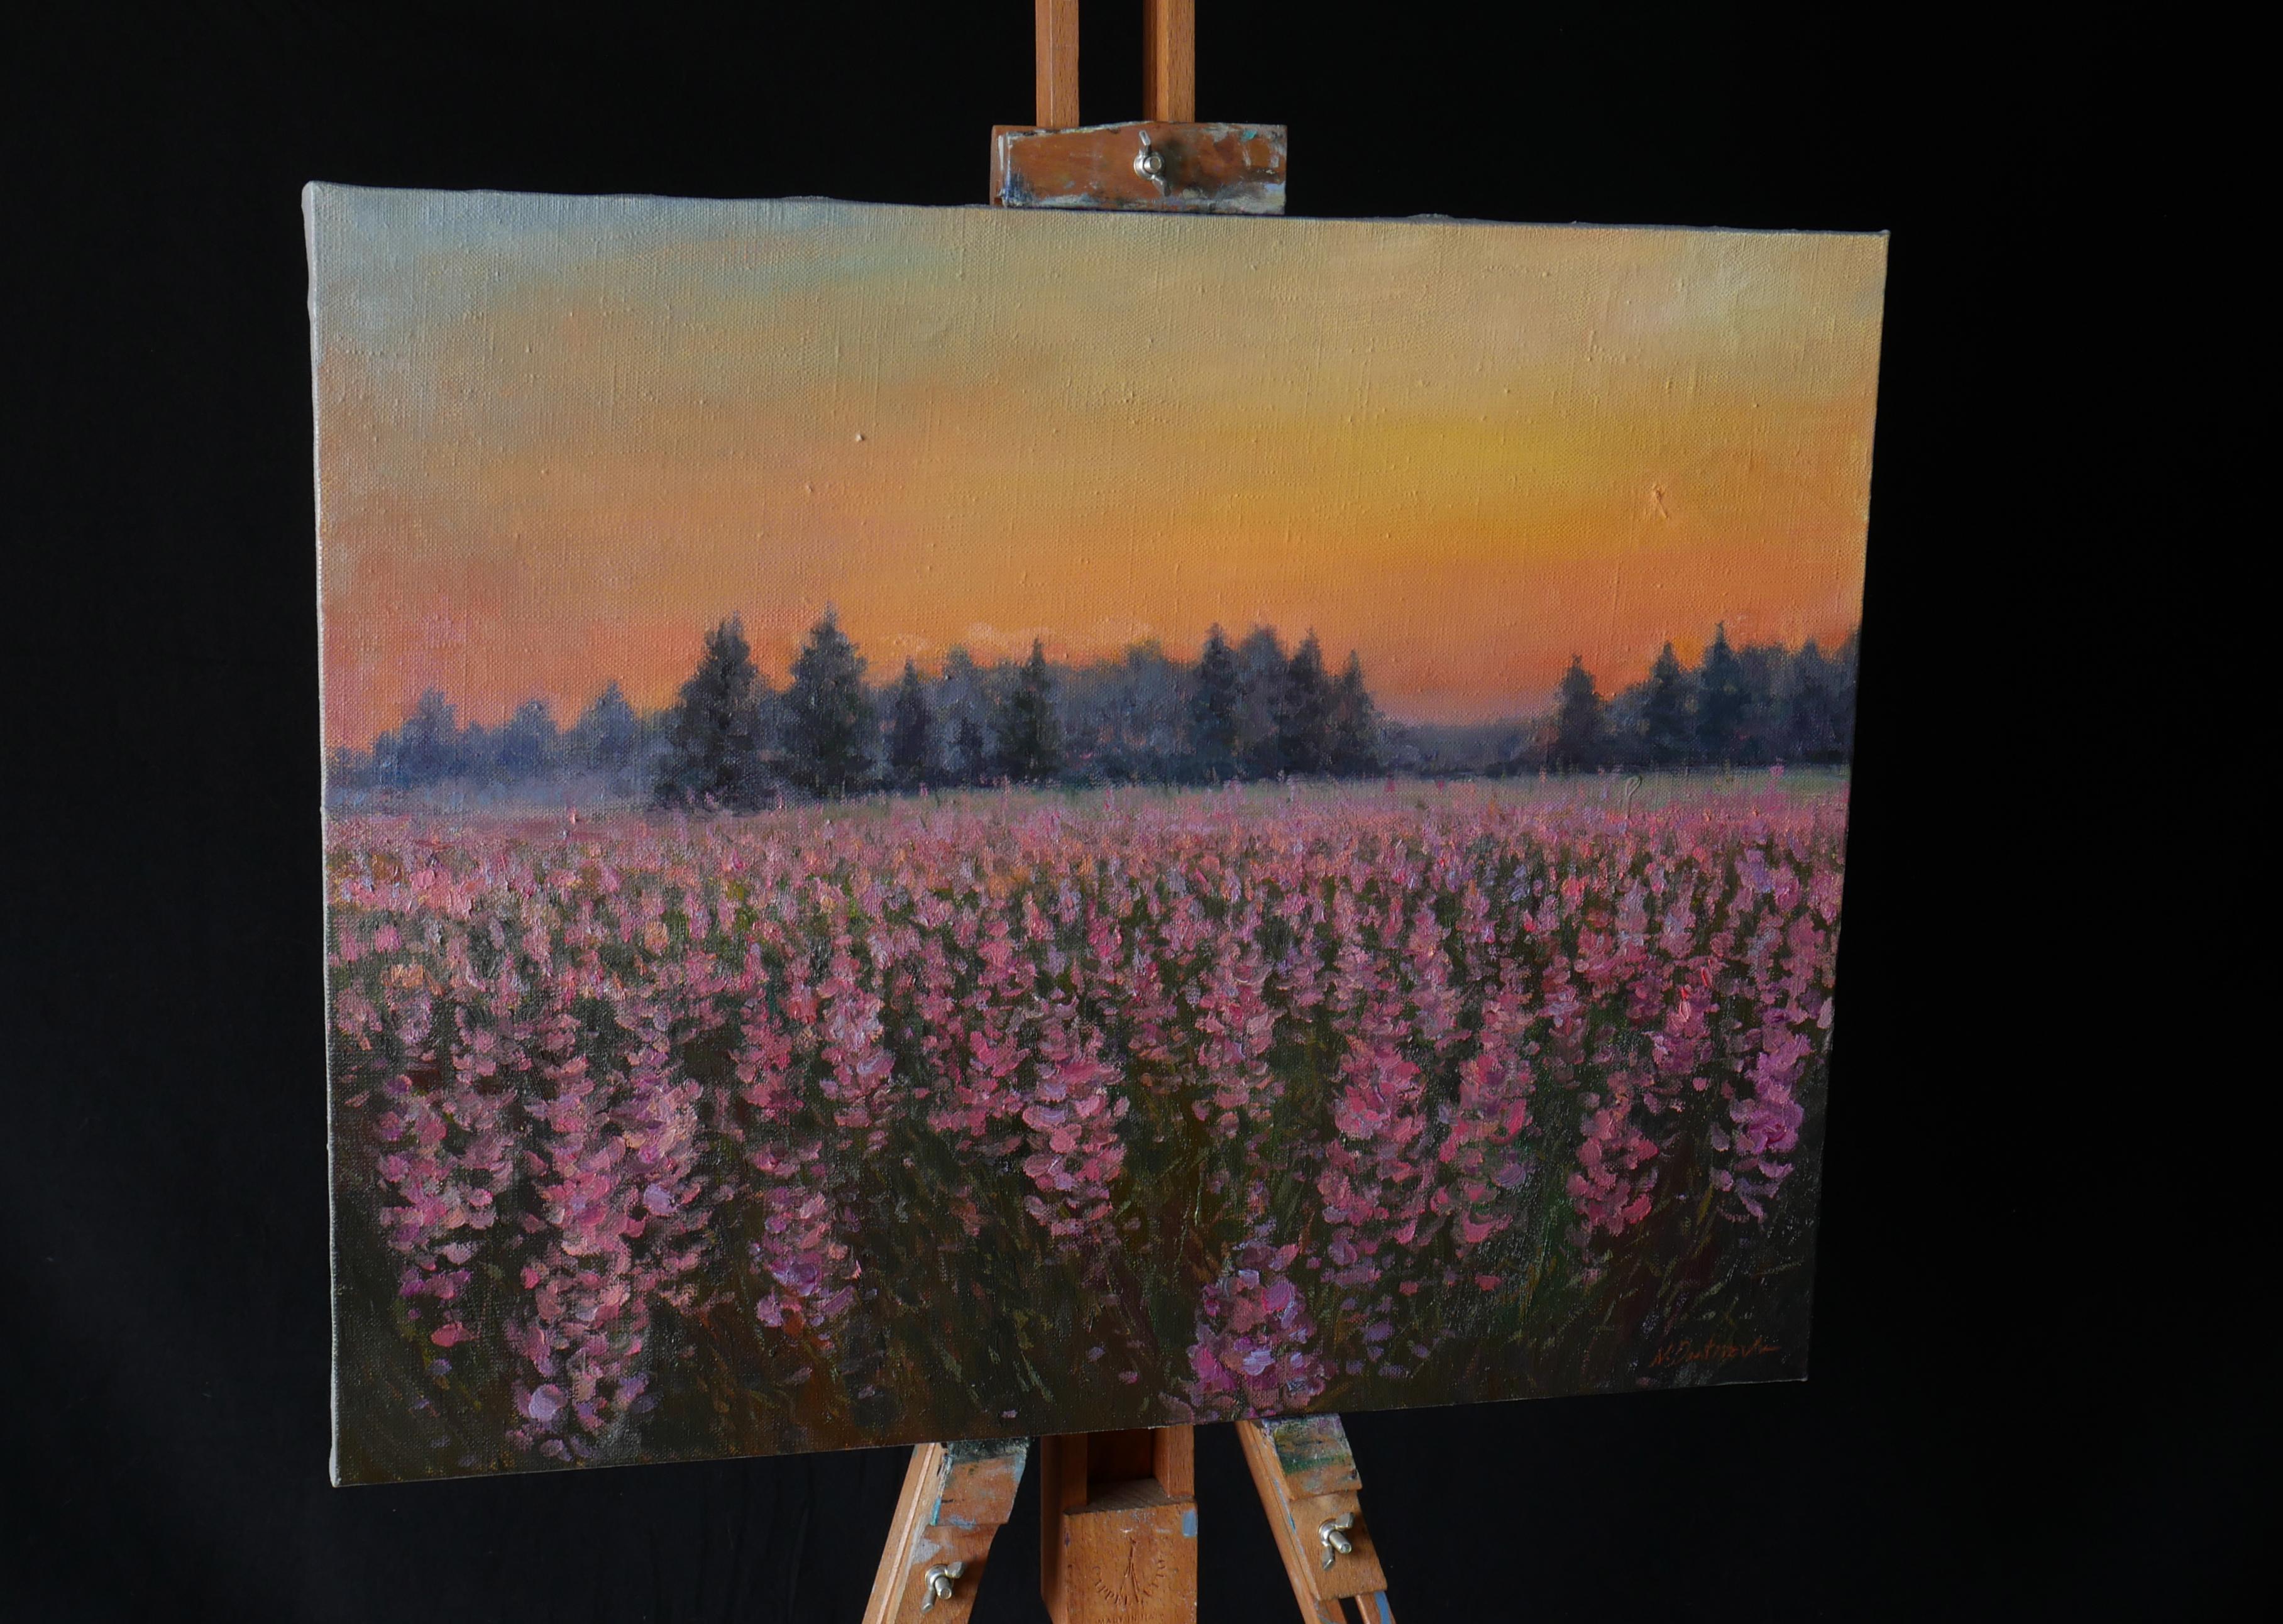 Sunset Above The Fireweed Field - original summer landscape painting - Impressionist Painting by Nikolay Dmitriev